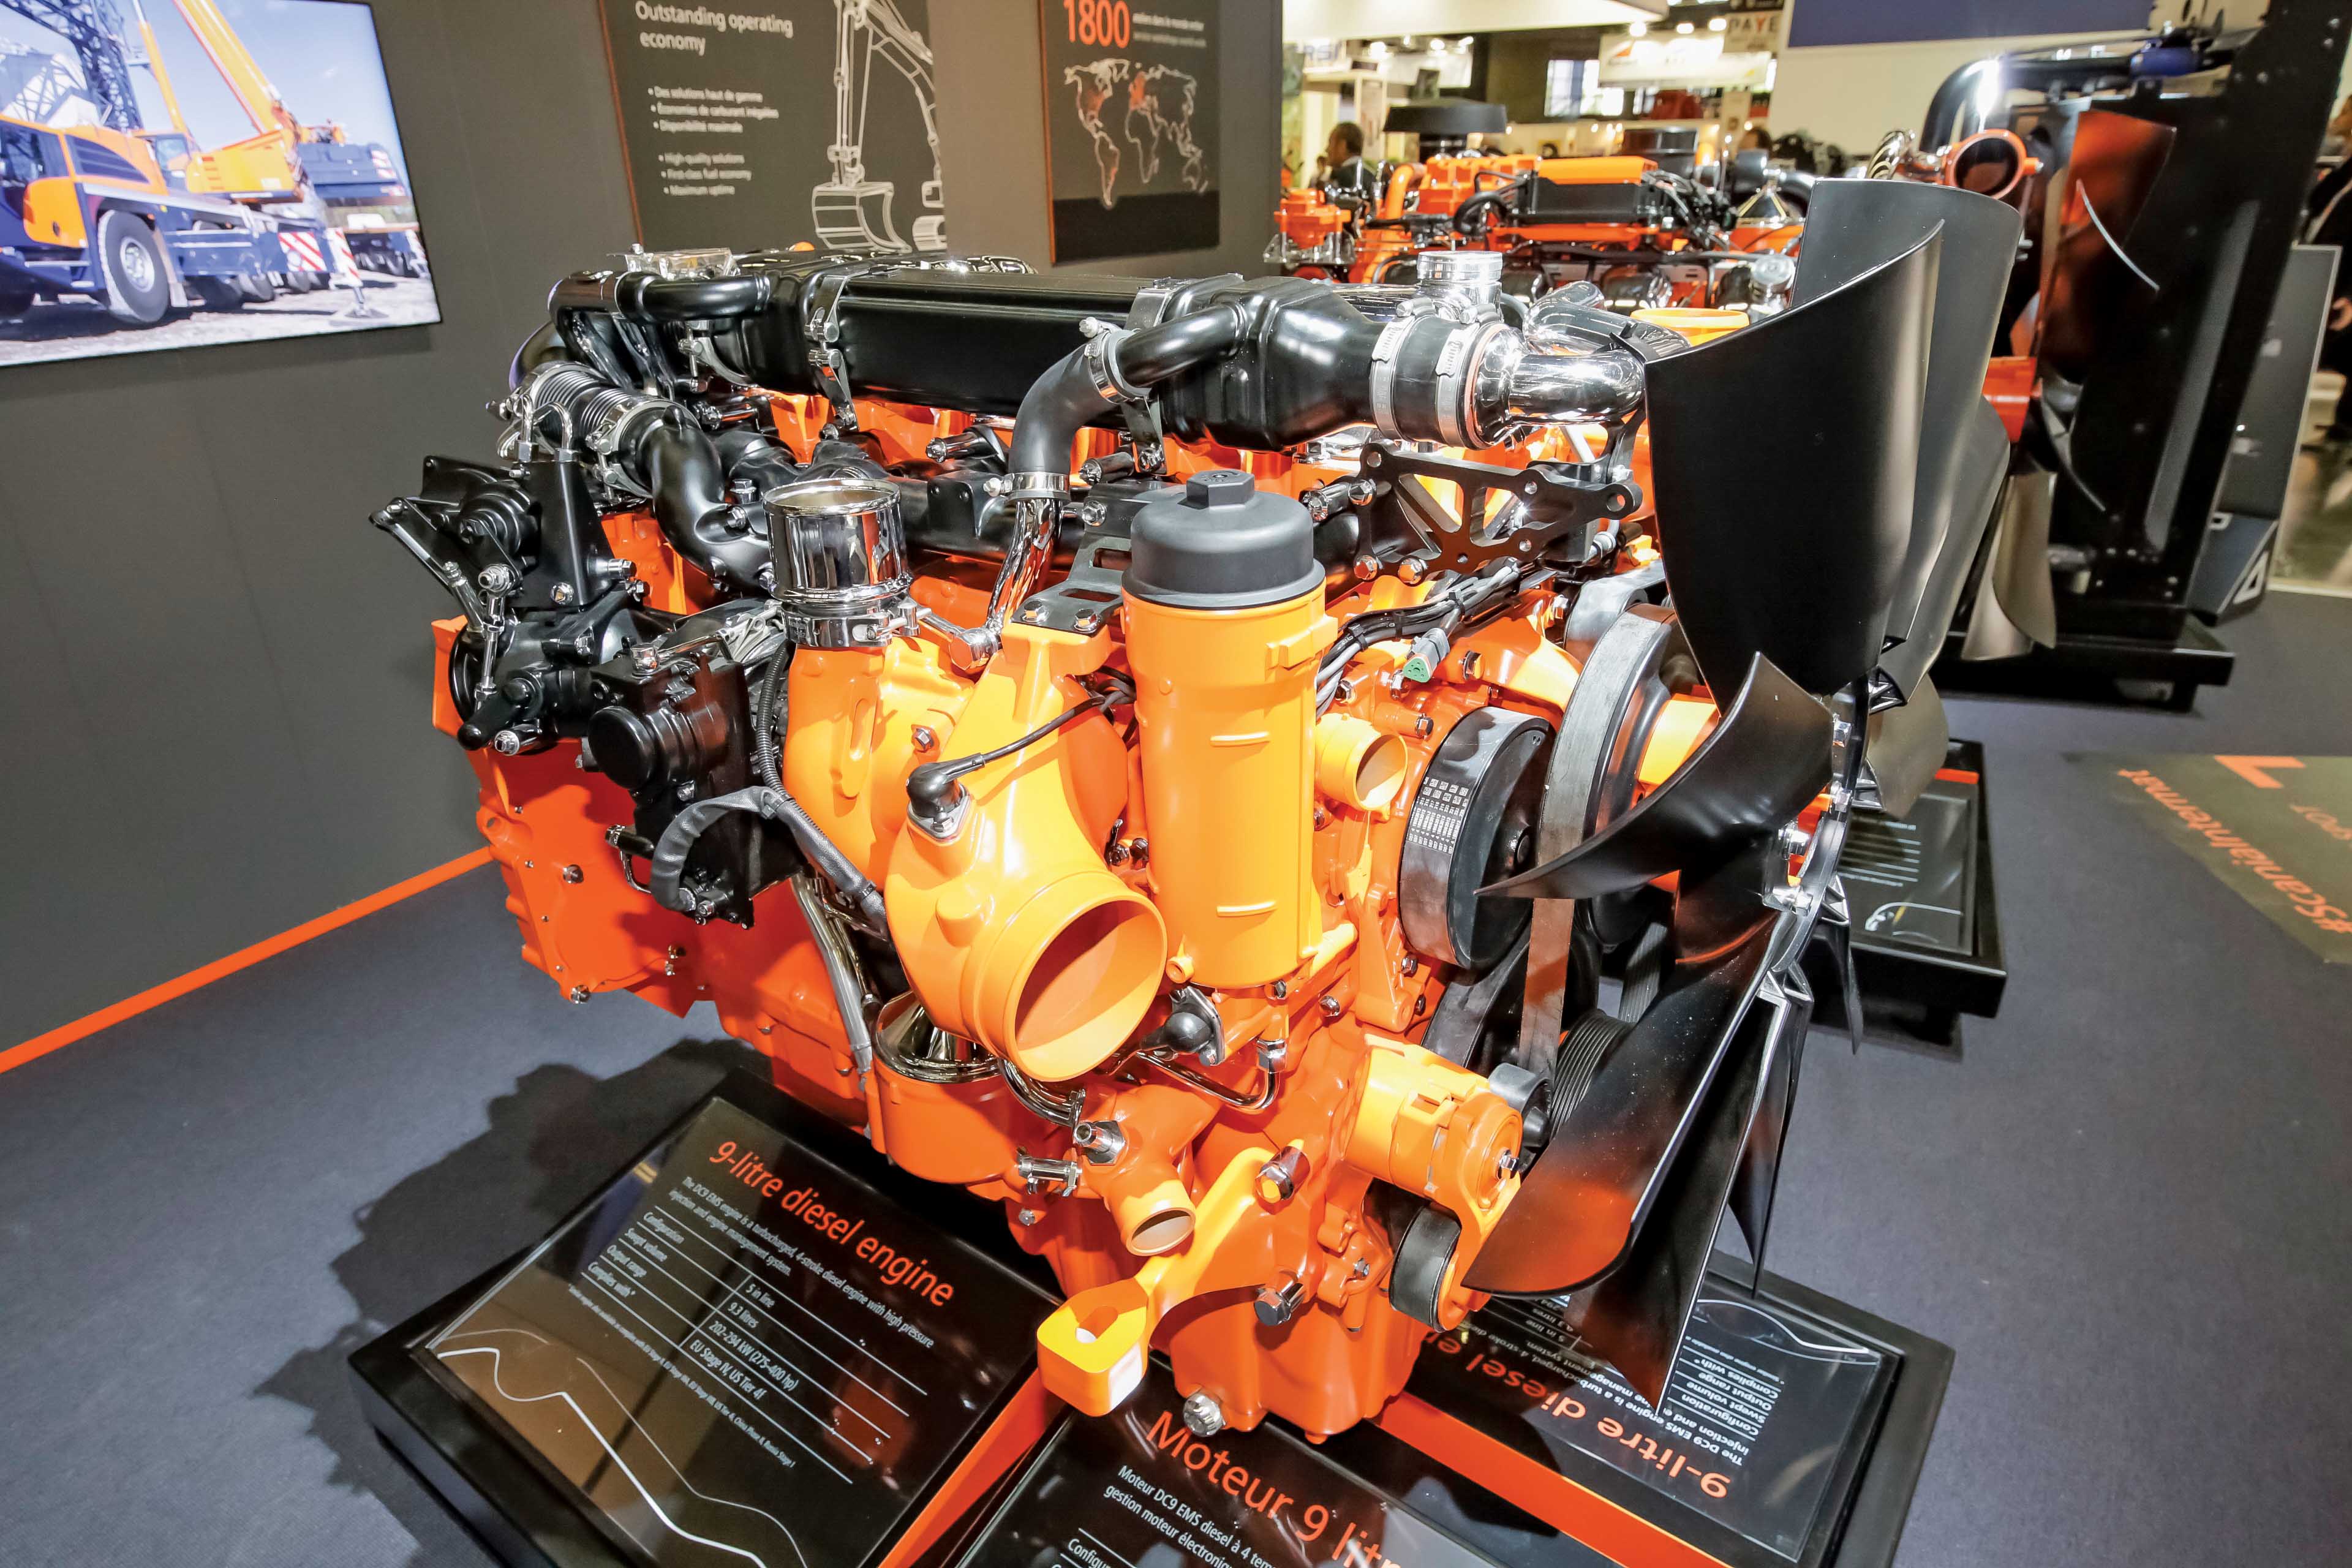 Scania EGR in its 9litre diesel 